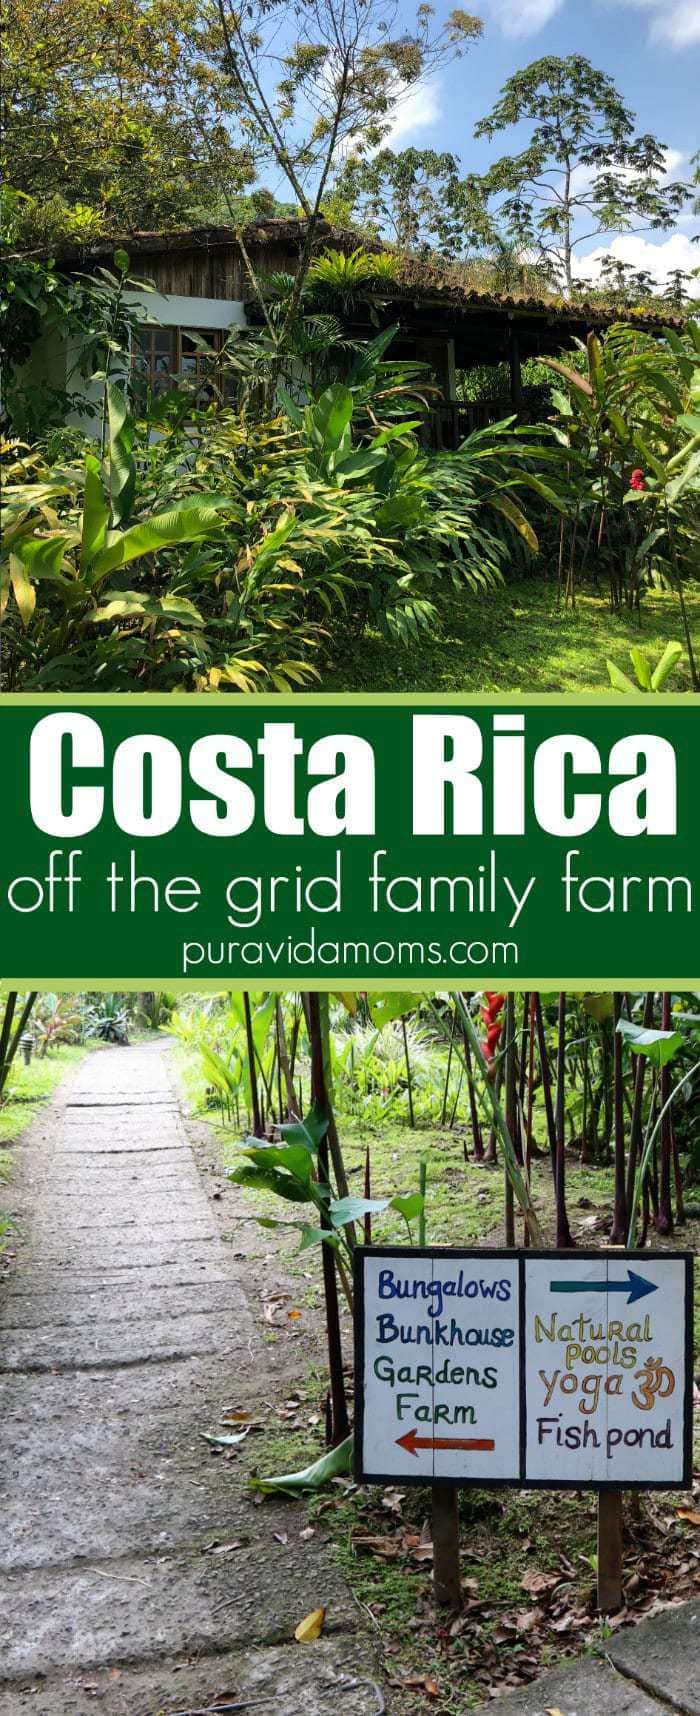 Rancho Margot Costa Rica For Families